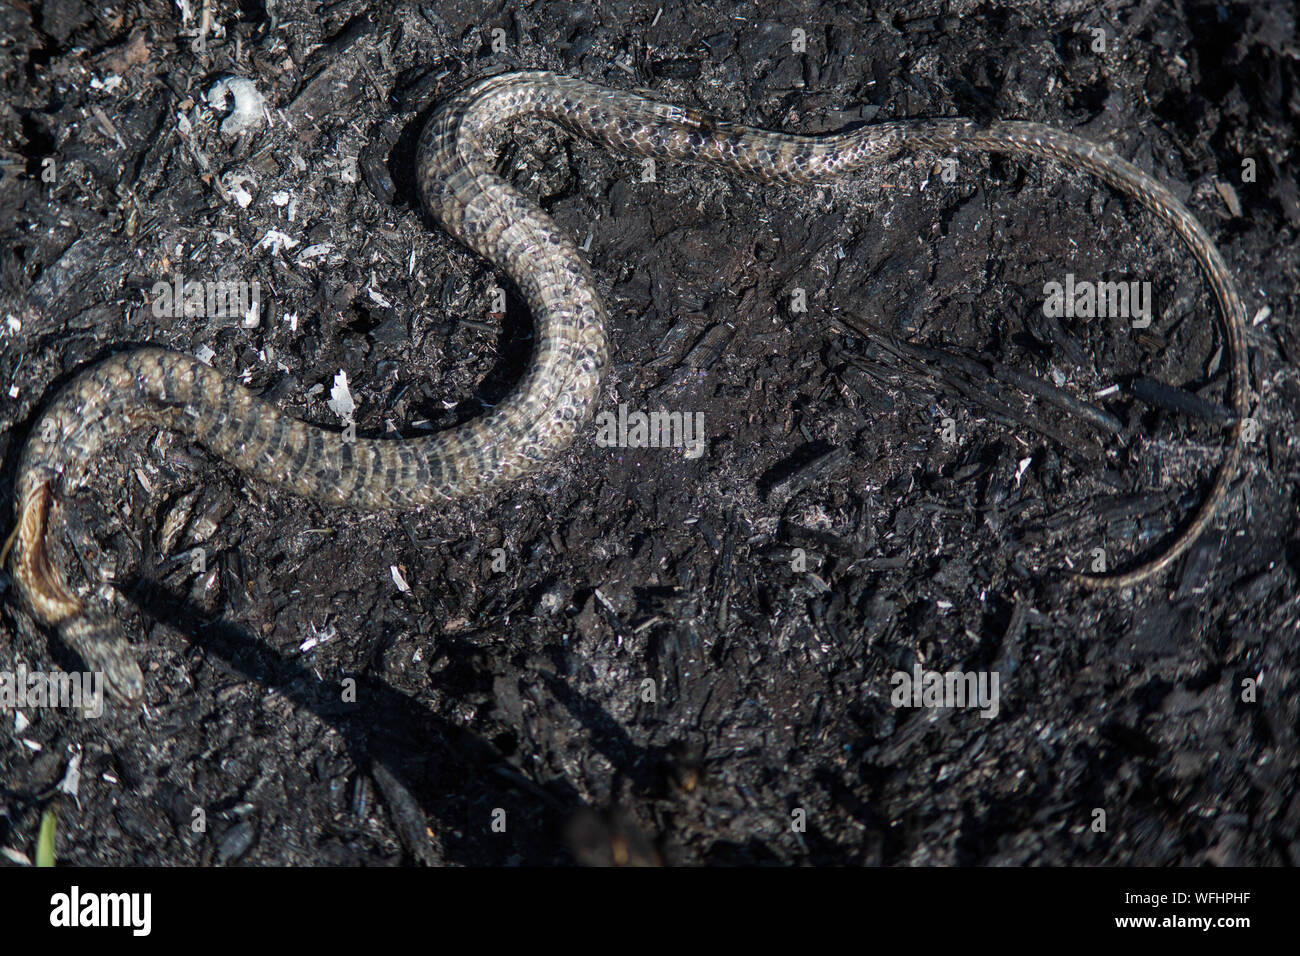 SUCRE, OP - 27.08.2019: LAND BURNED BY FIRES IN BOLIVIA - A snake burned in the Otuquis Pantanal. (Photo: Gaston Brito/Fotoarena) Credit: Foto Arena LTDA/Alamy Live News Credit: Foto Arena LTDA/Alamy Live News Stock Photo